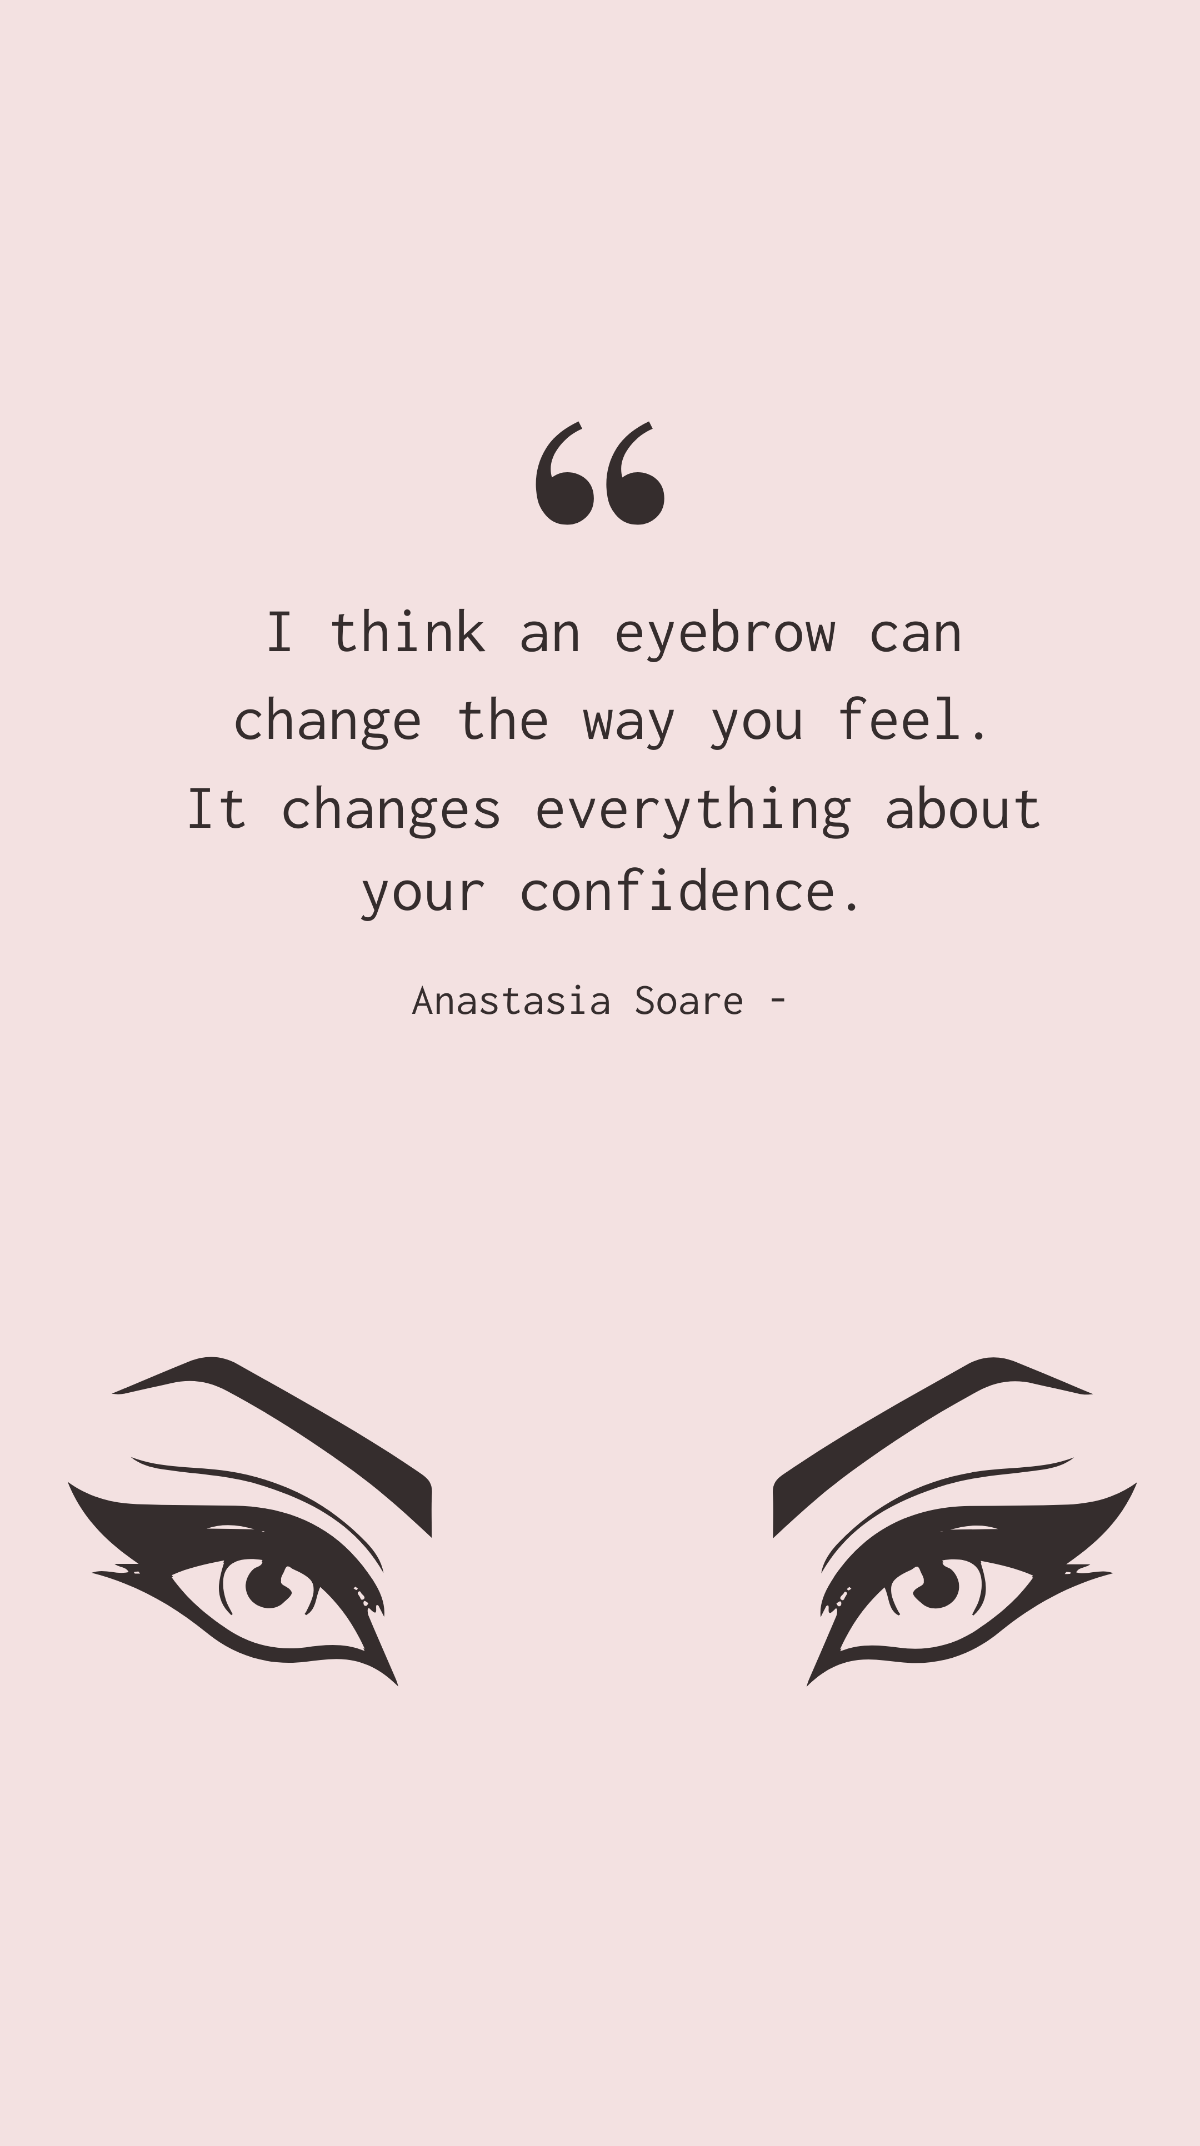 Anastasia Soare - I think an eyebrow can change the way you feel. It changes everything about your confidence. Template